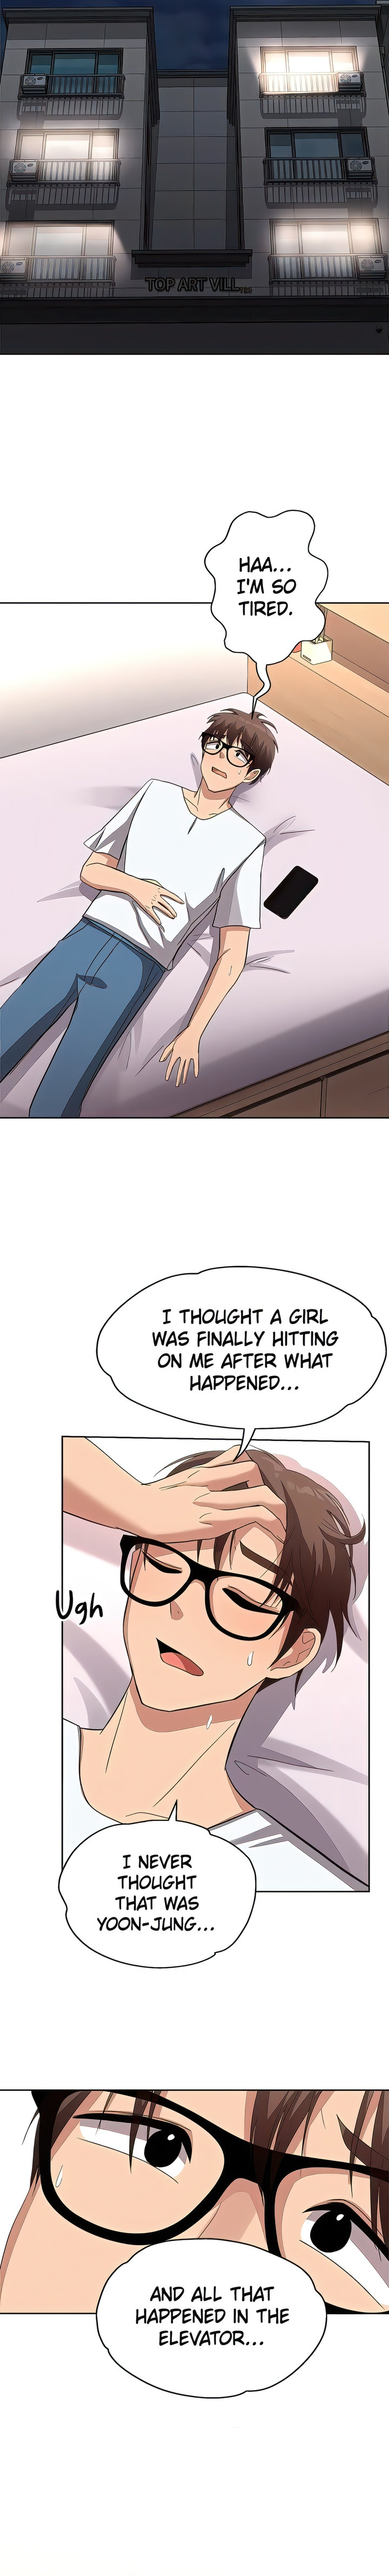 Girls I Used to Teach - Chapter 20 Page 10